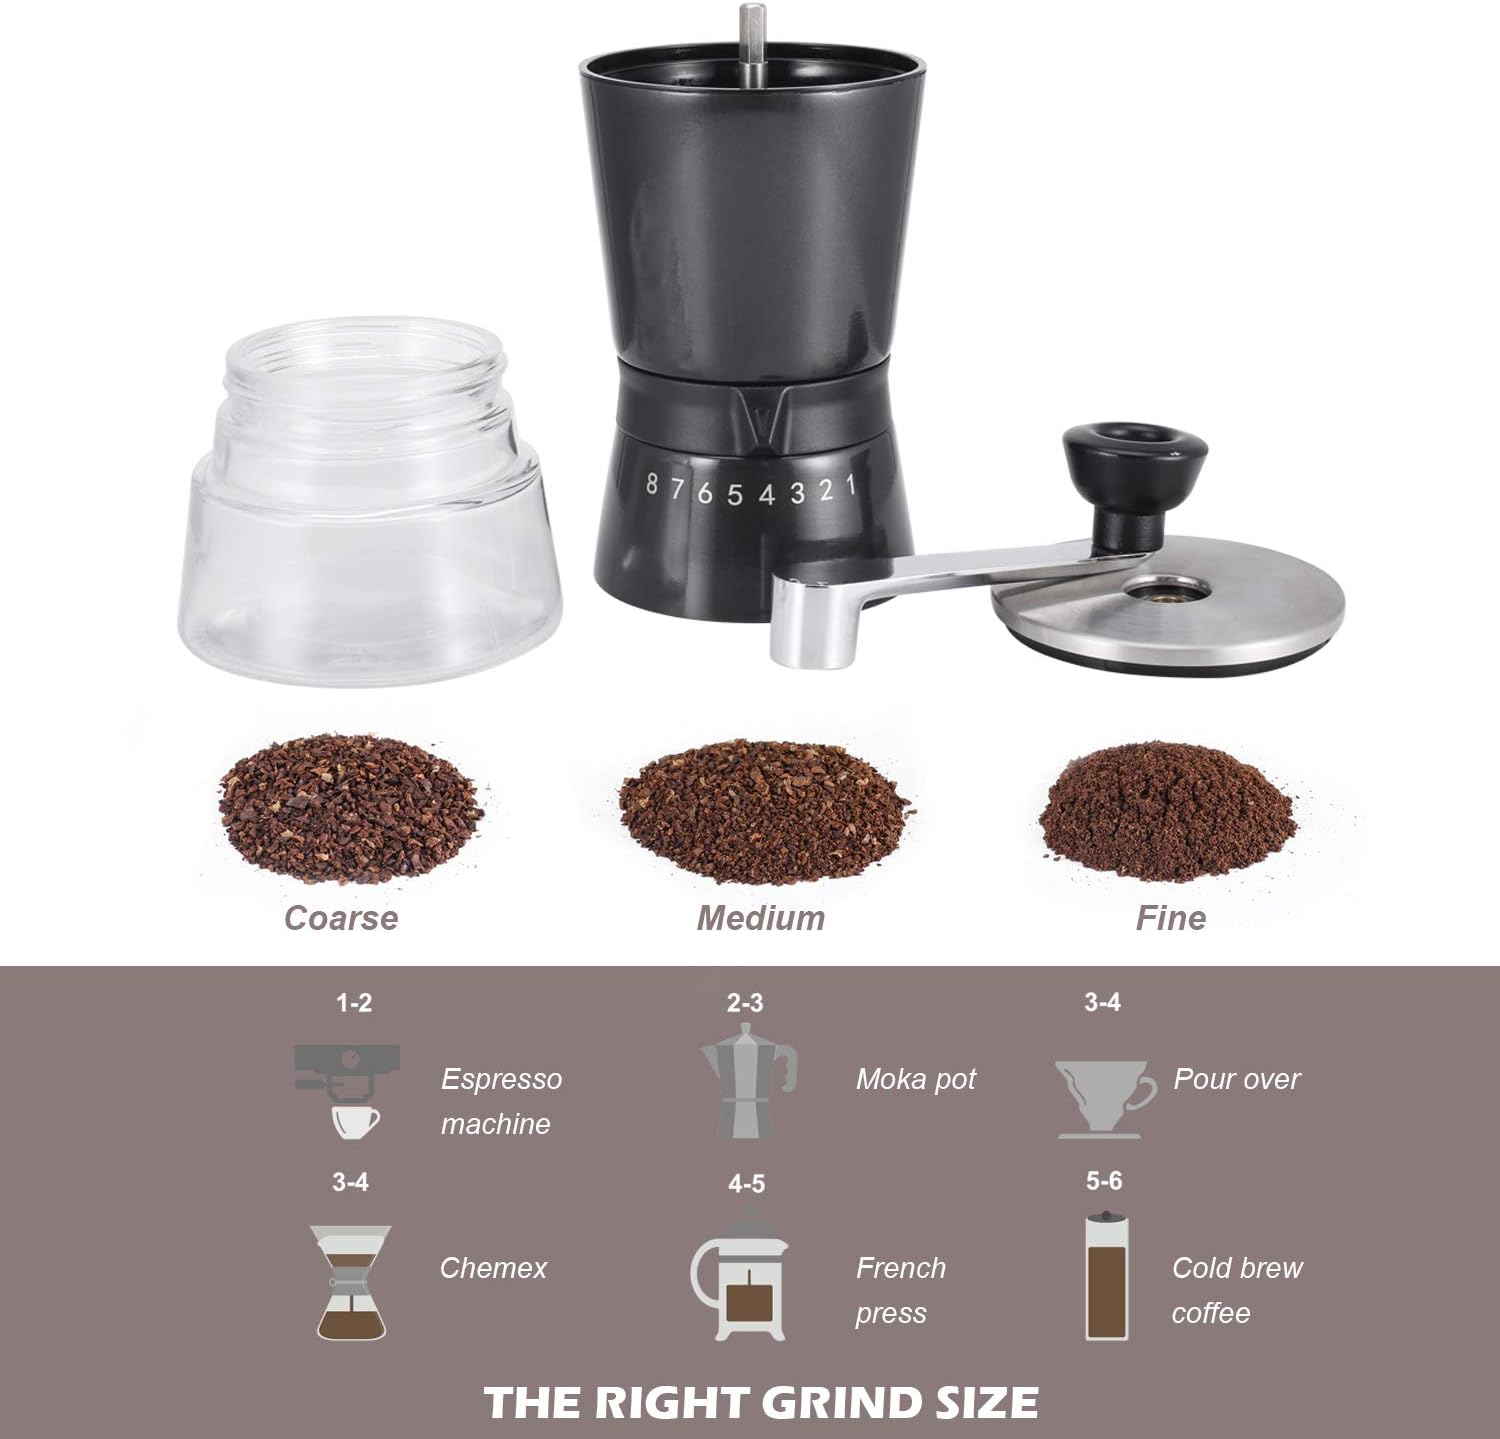 Manual Coffee Grinder - Hand Coffee Mill with Conical Ceramic Burrs - 15 Adjustable Settings - Portable Hand Crank Extra Bonus Cap (Green)